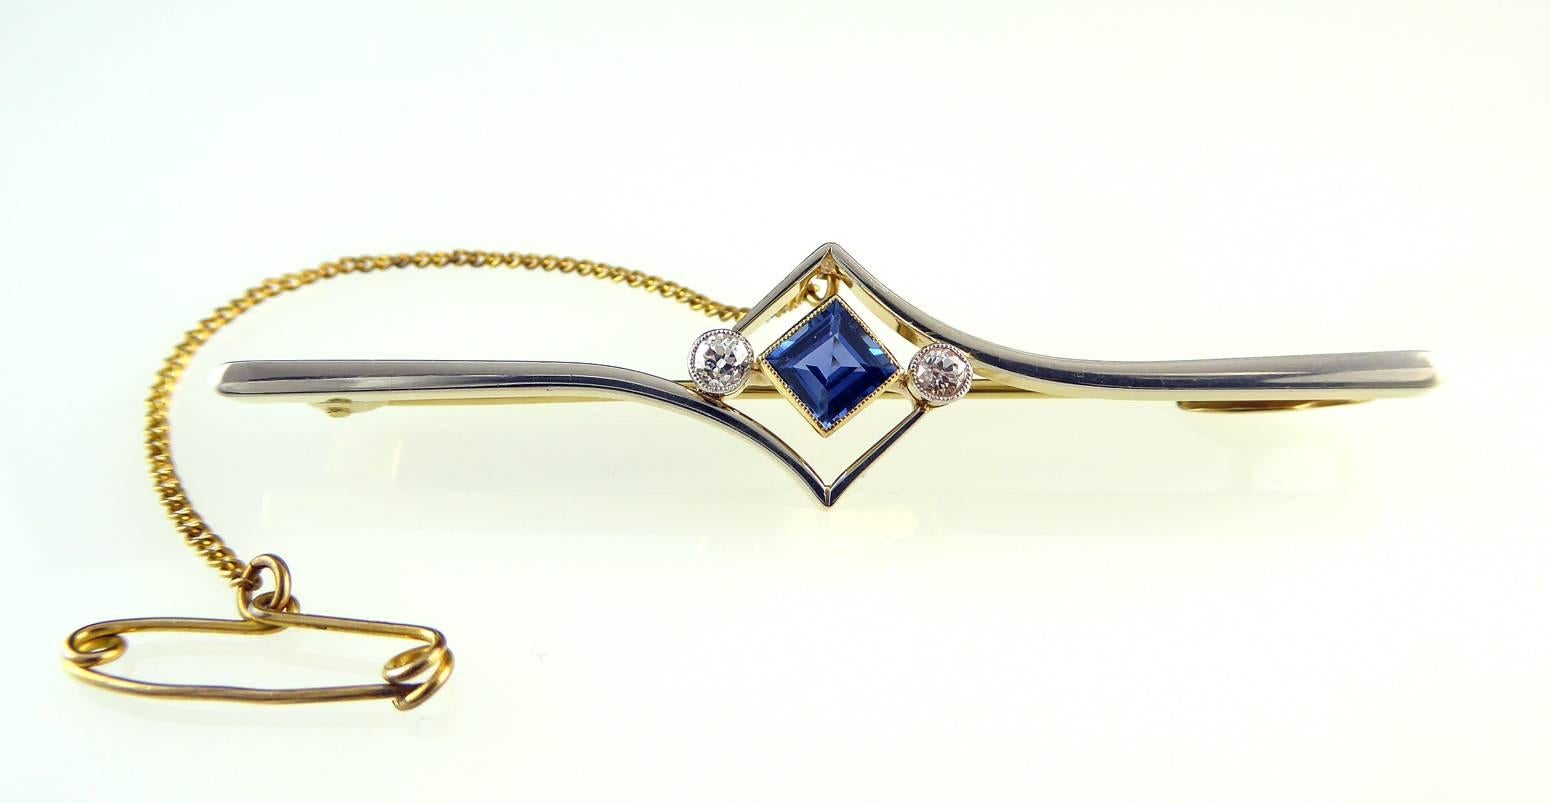 A lovely Art Deco brooch set with a square cut sapphire placed on a point to the centre and partnered on each side by an old cut diamond.  This very elegant trio of gemstones sits within an open diamond shaped design in a typical 1920's style.  The